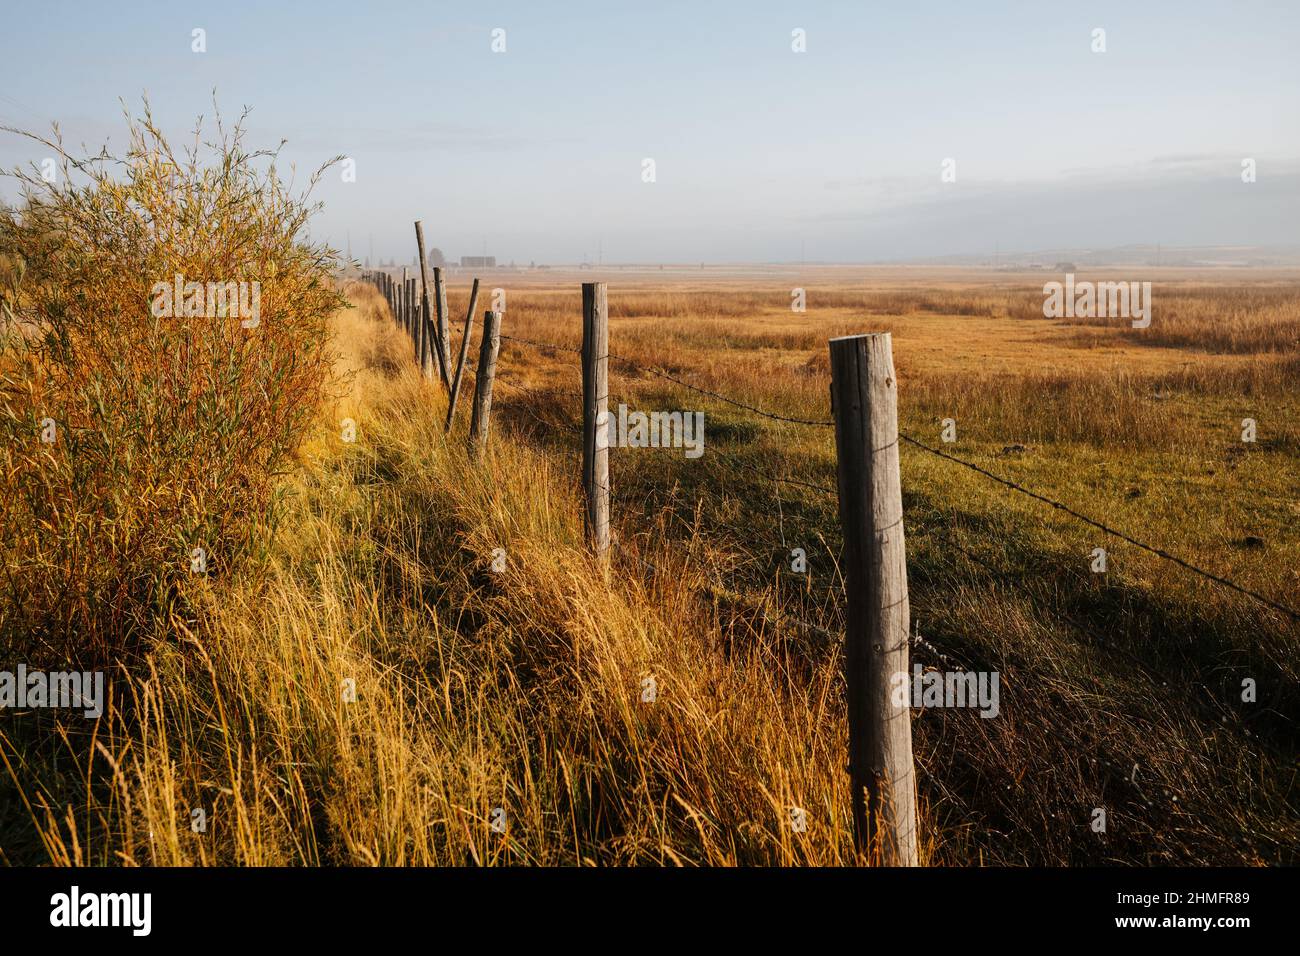 Spacious vacant private farm land property Stock Photo